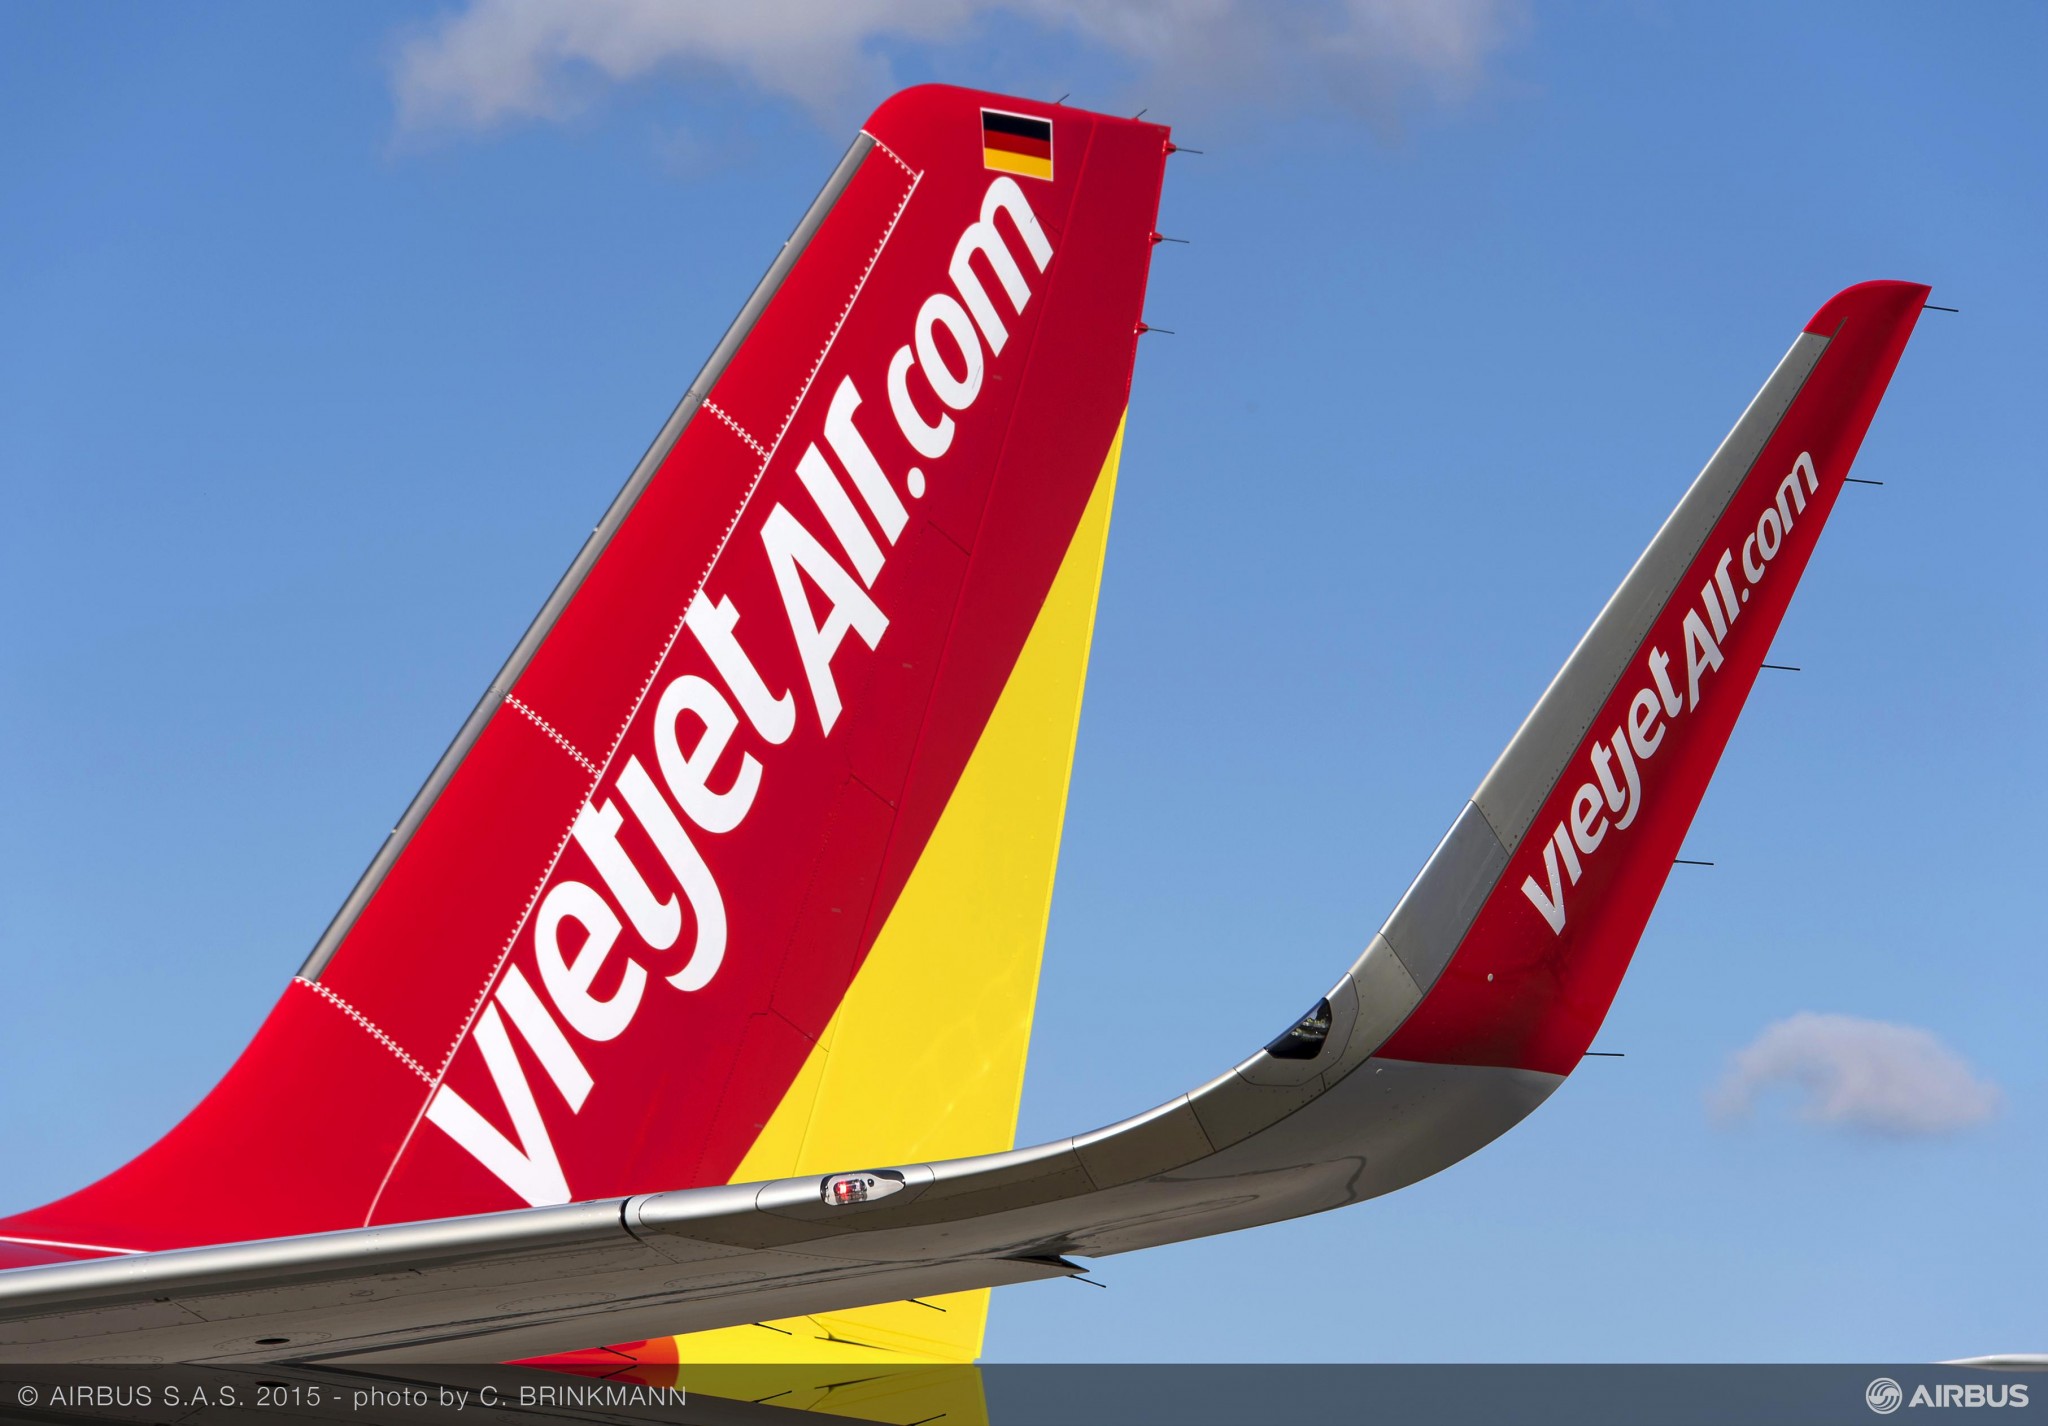 Vietjet records 2,496 billion dong profit after tax in 2016